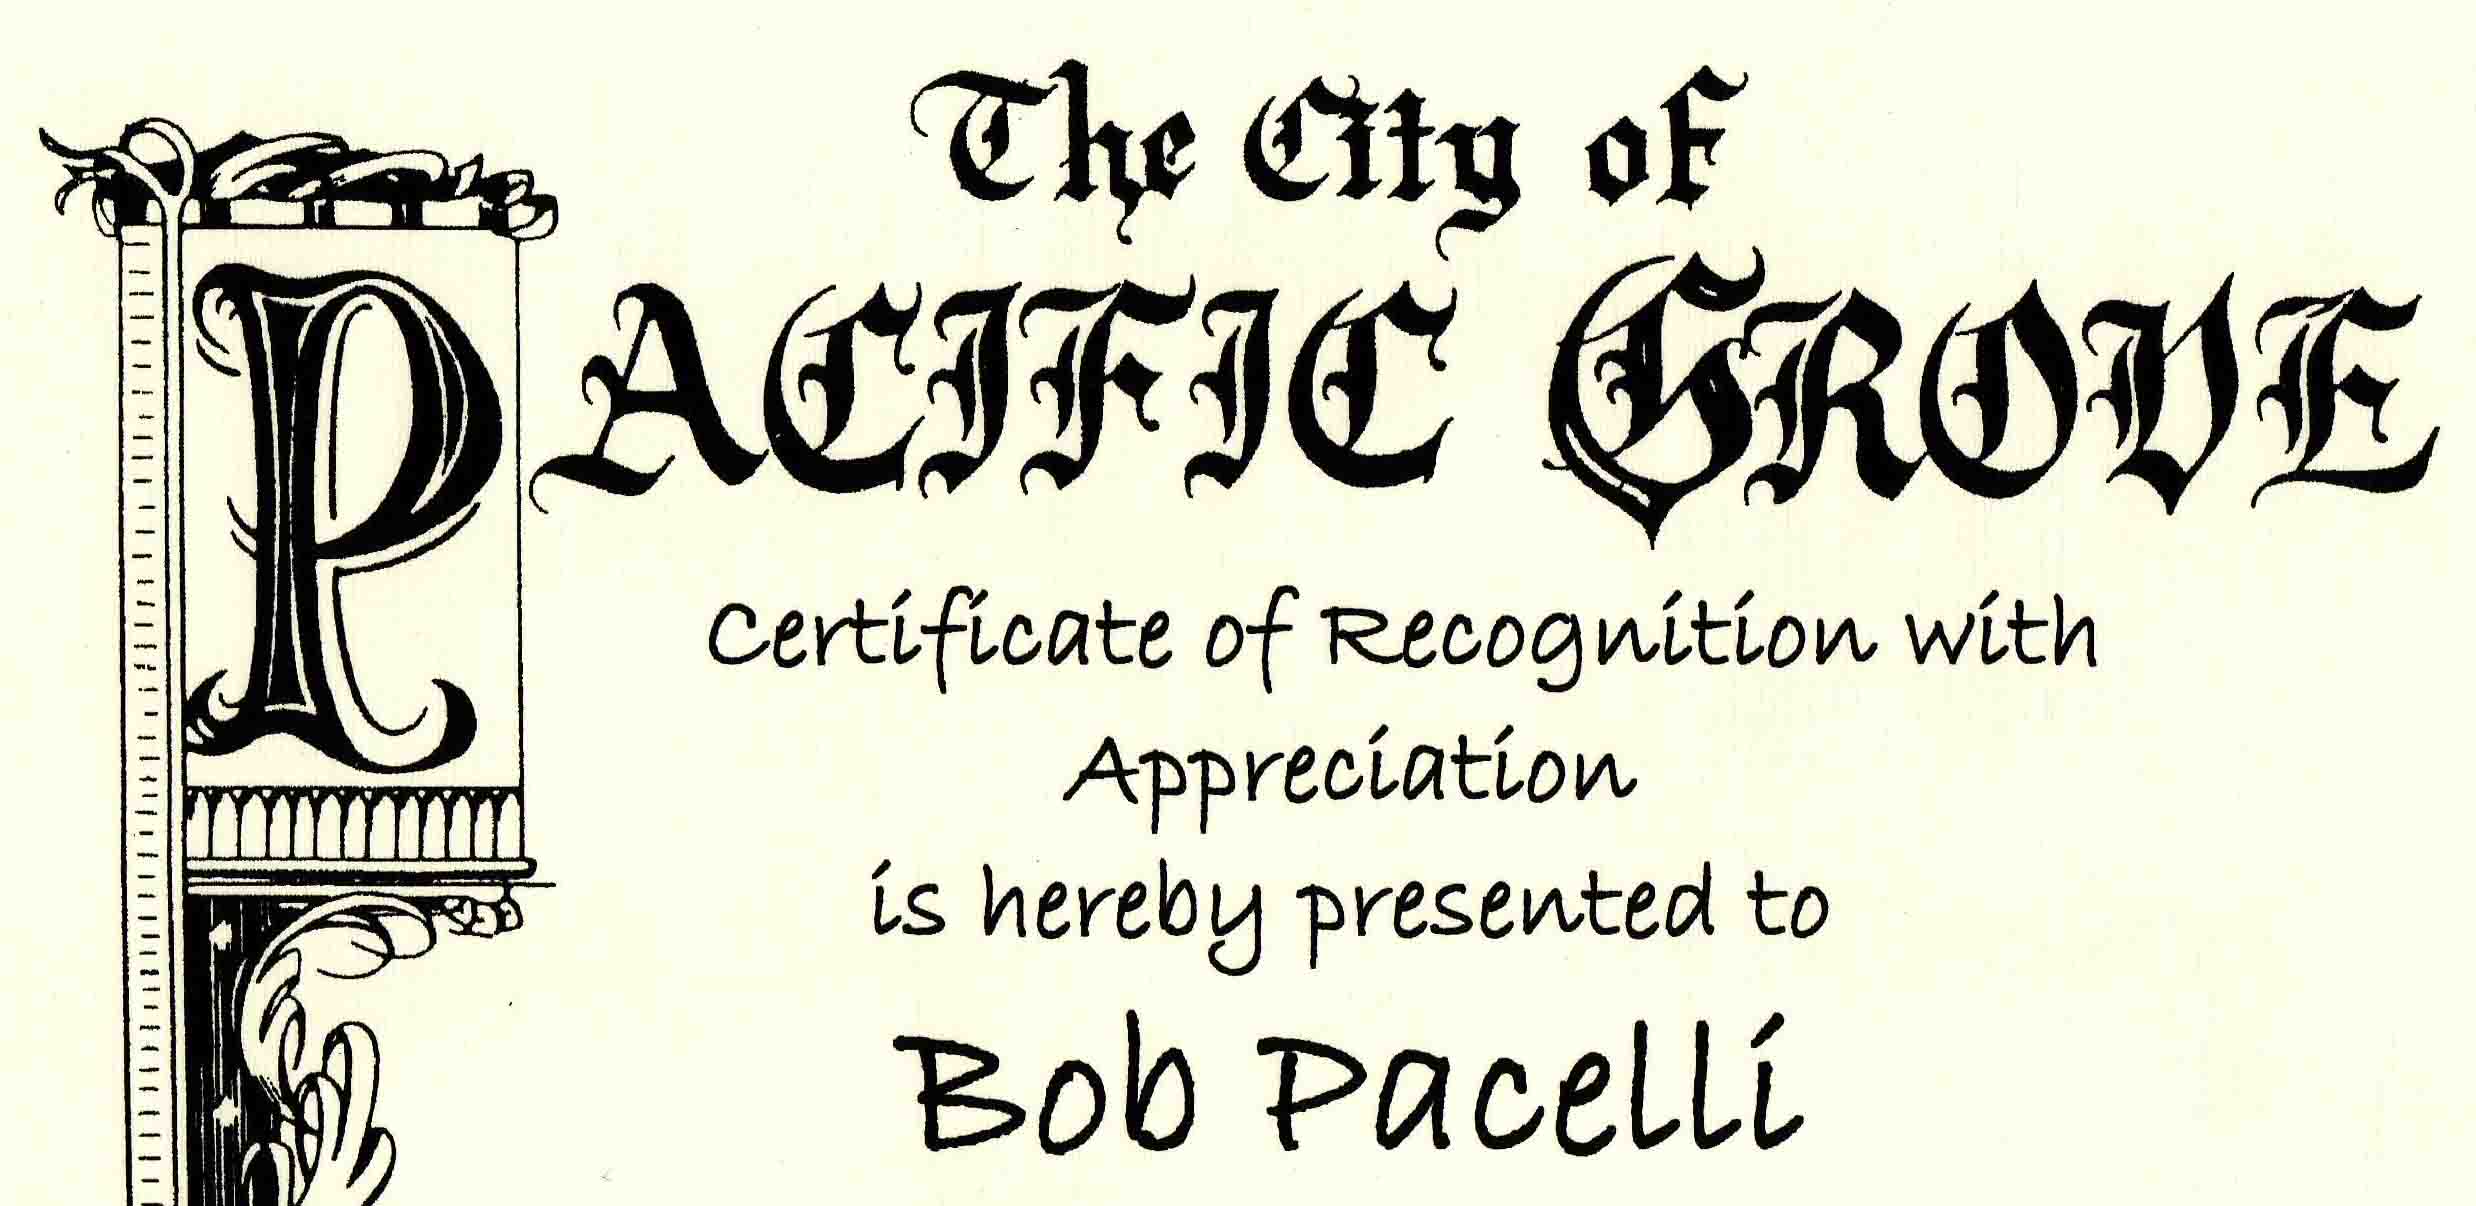 Robert Pacelli's Award from the City of Pacific Grove - 2011